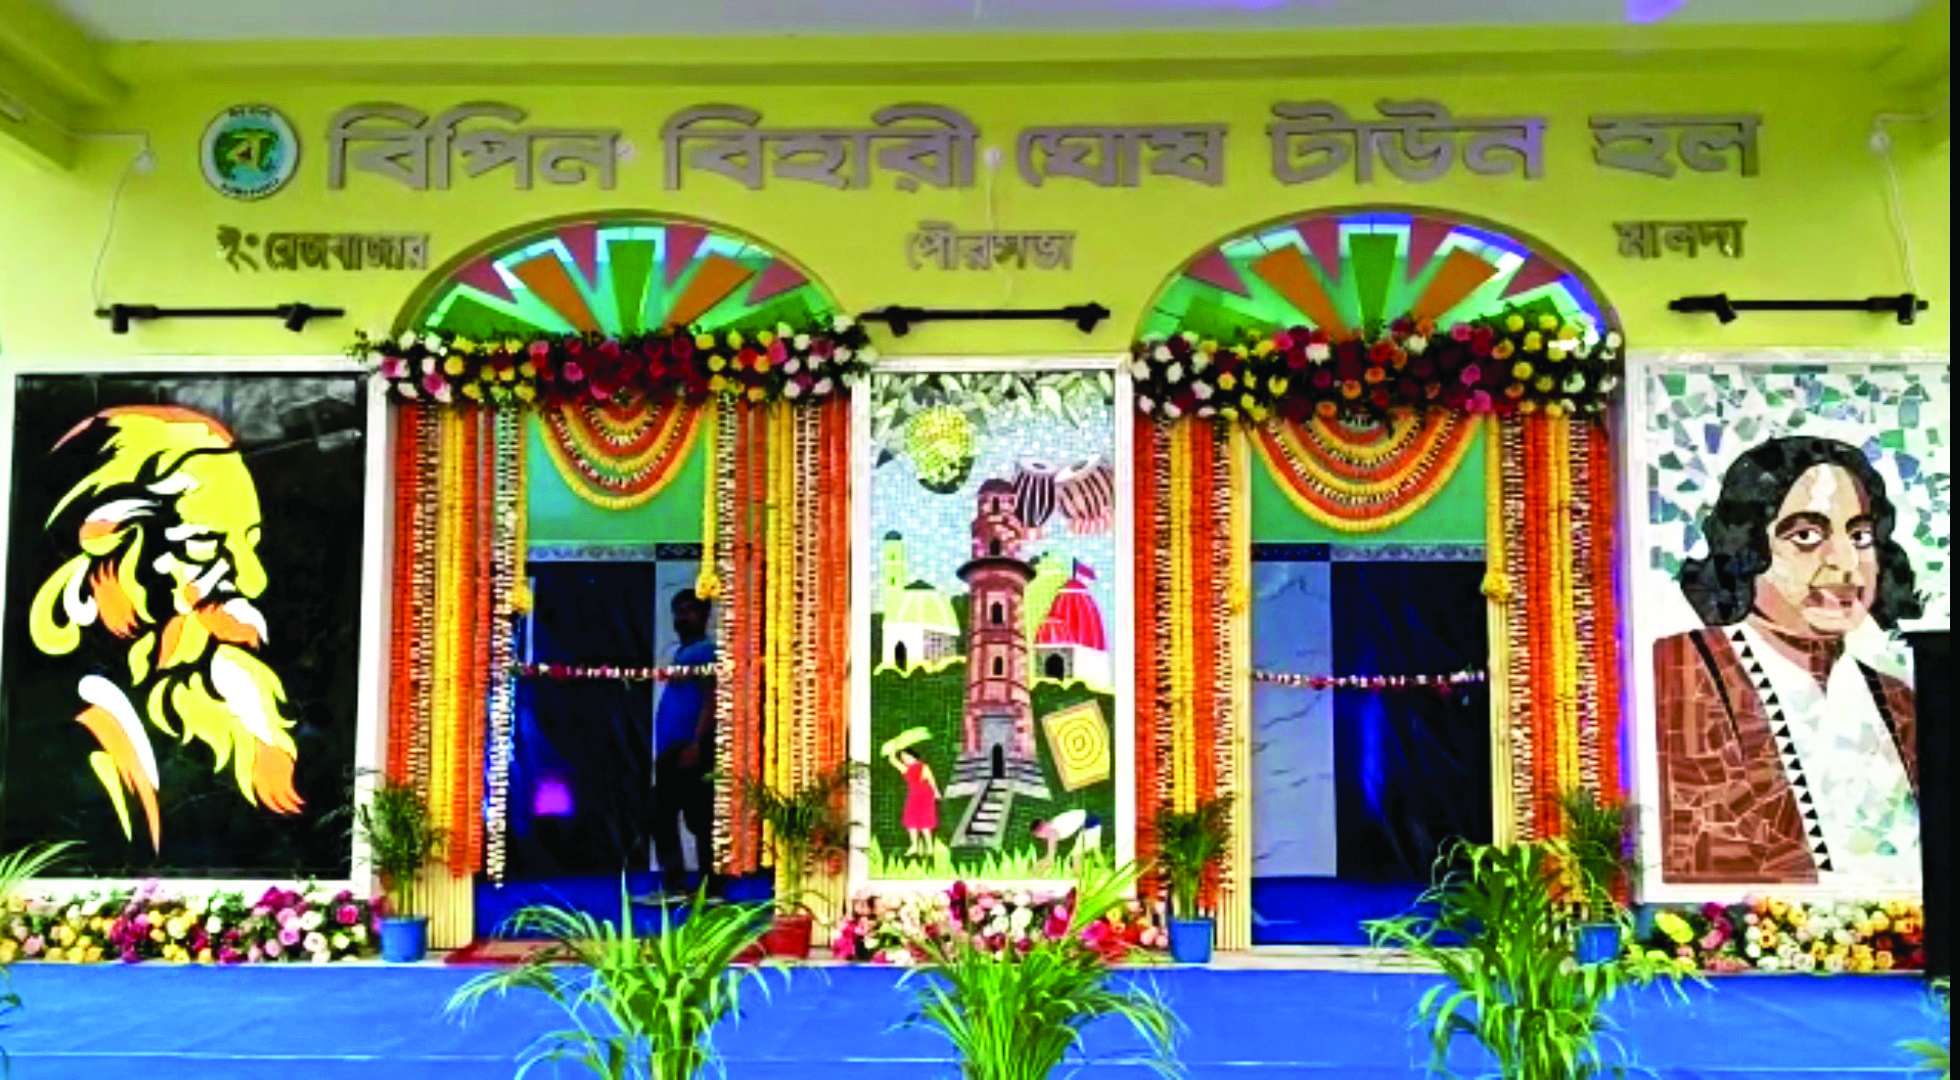 Malda Town Hall gets major facelift: 300 seats replaced, facility renovated at Rs 60L